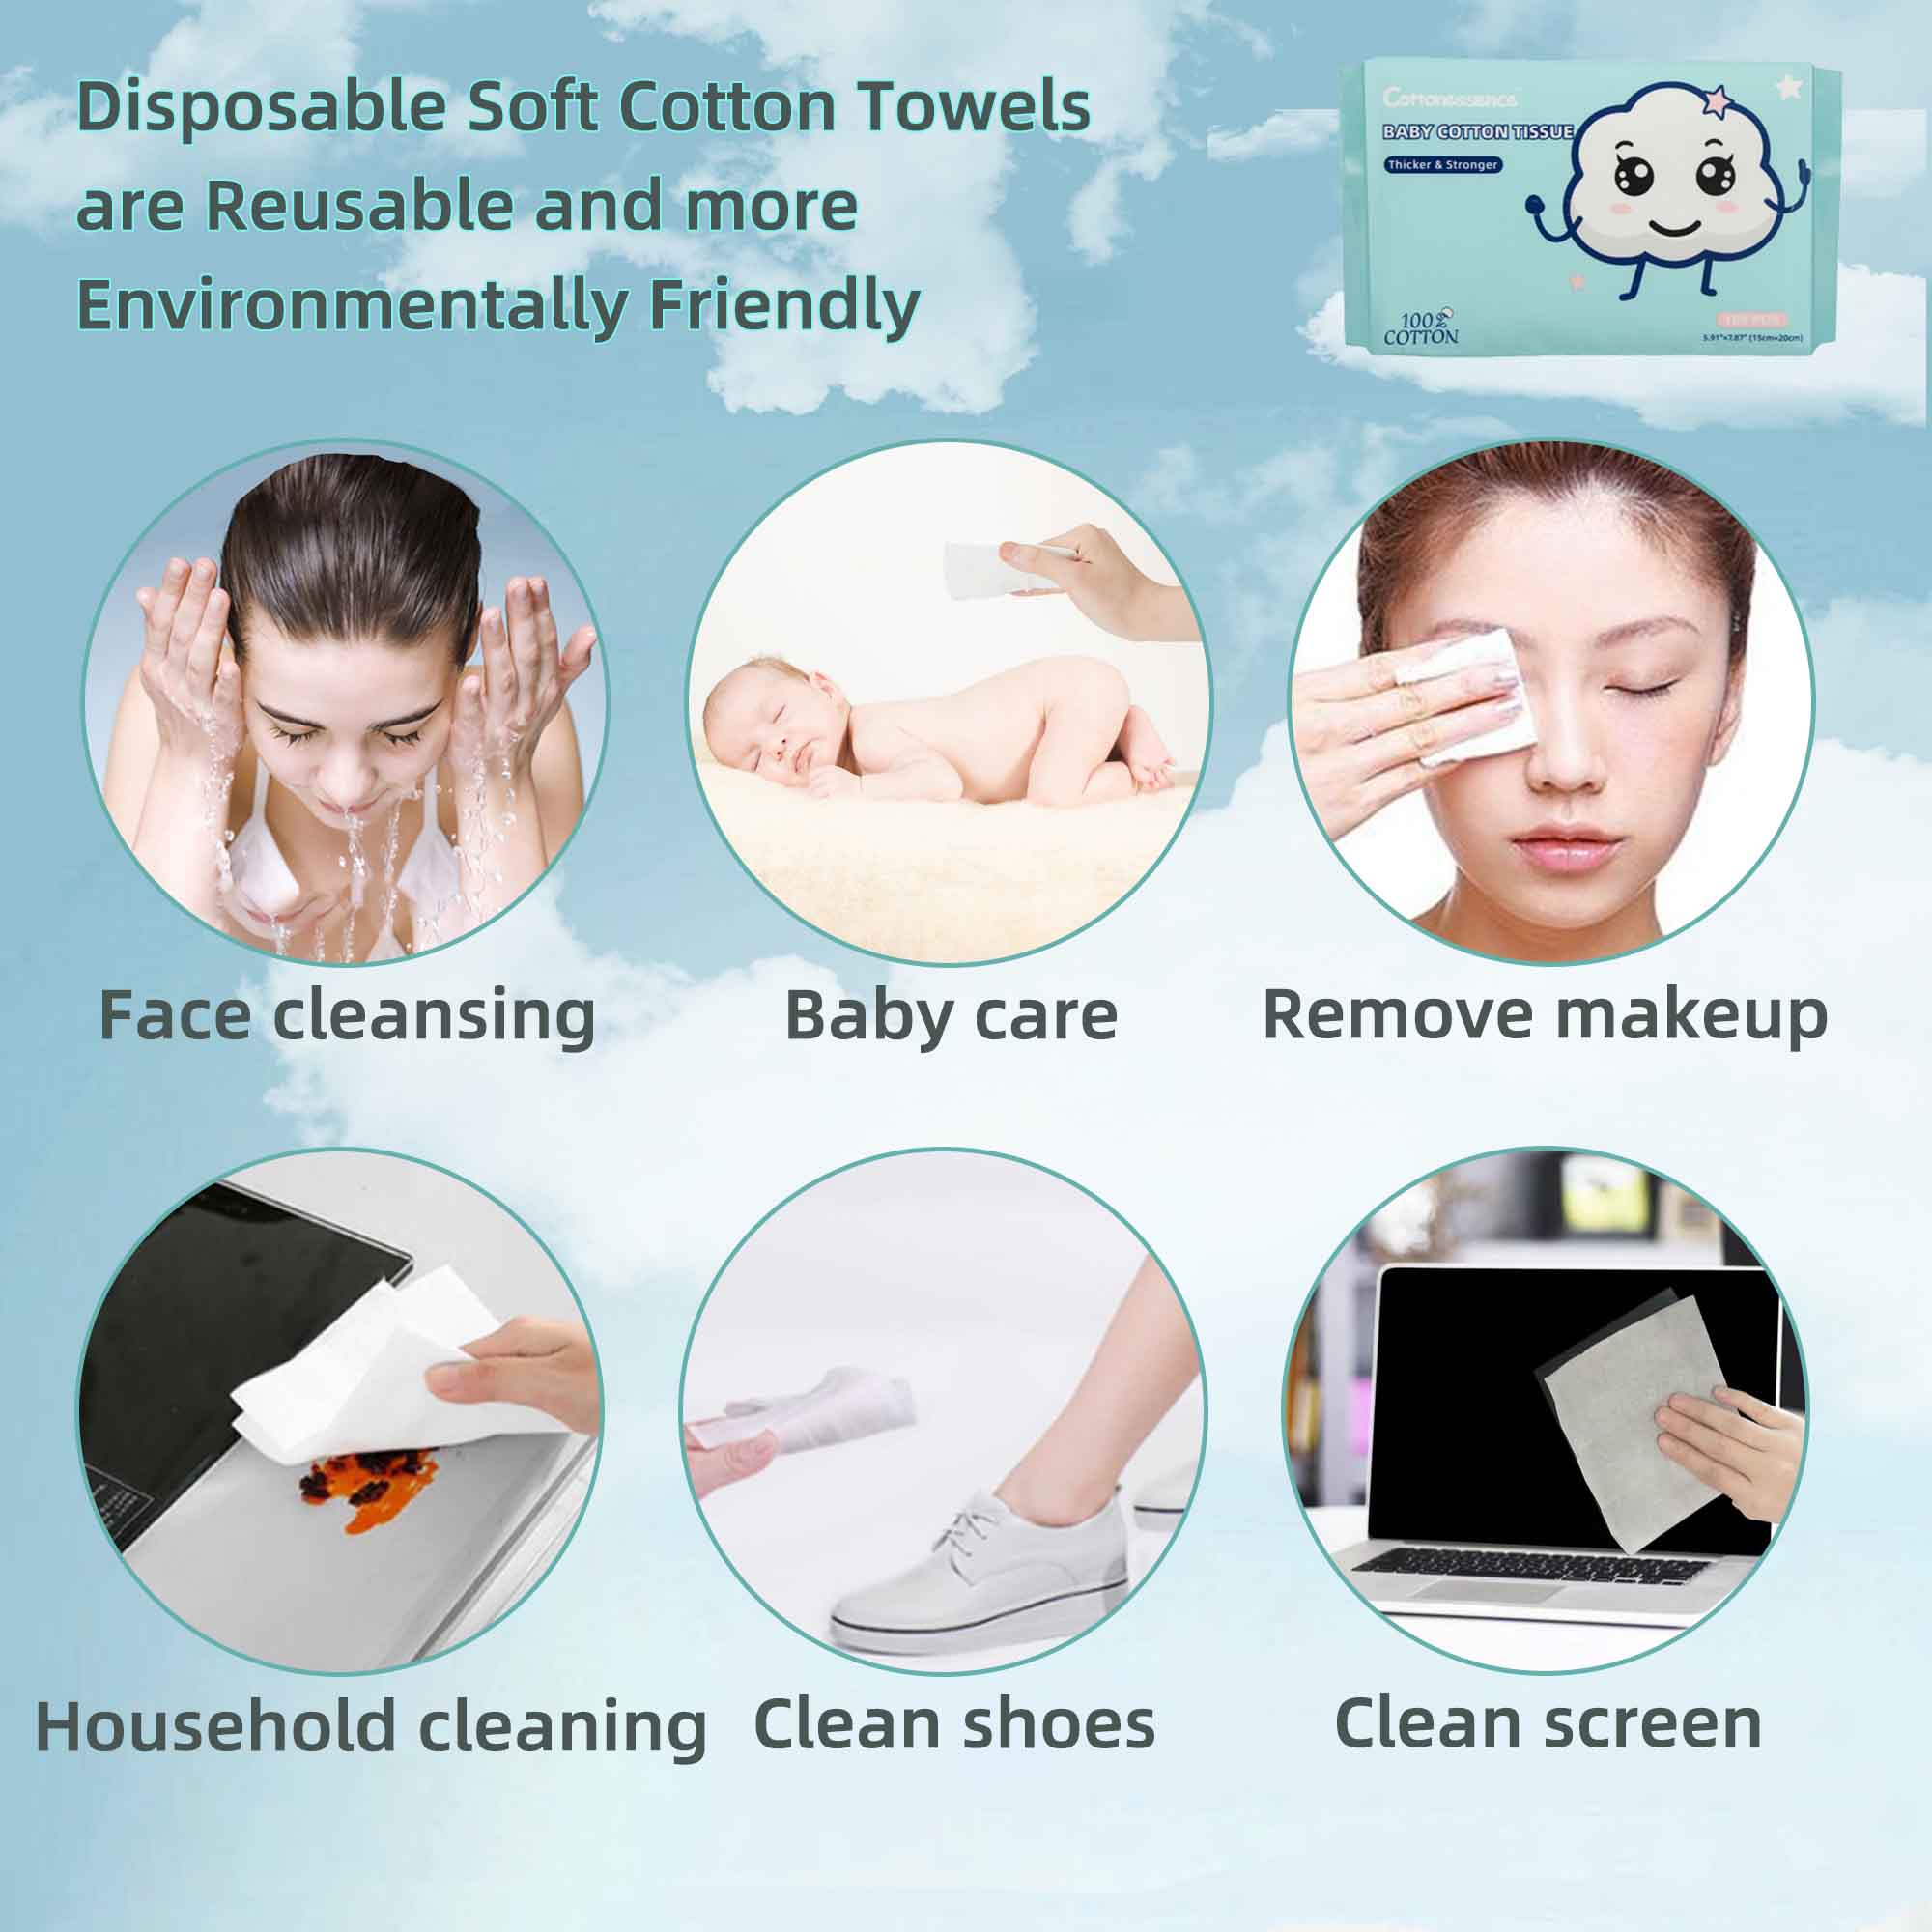 Disposable Cotton Soft Wipes